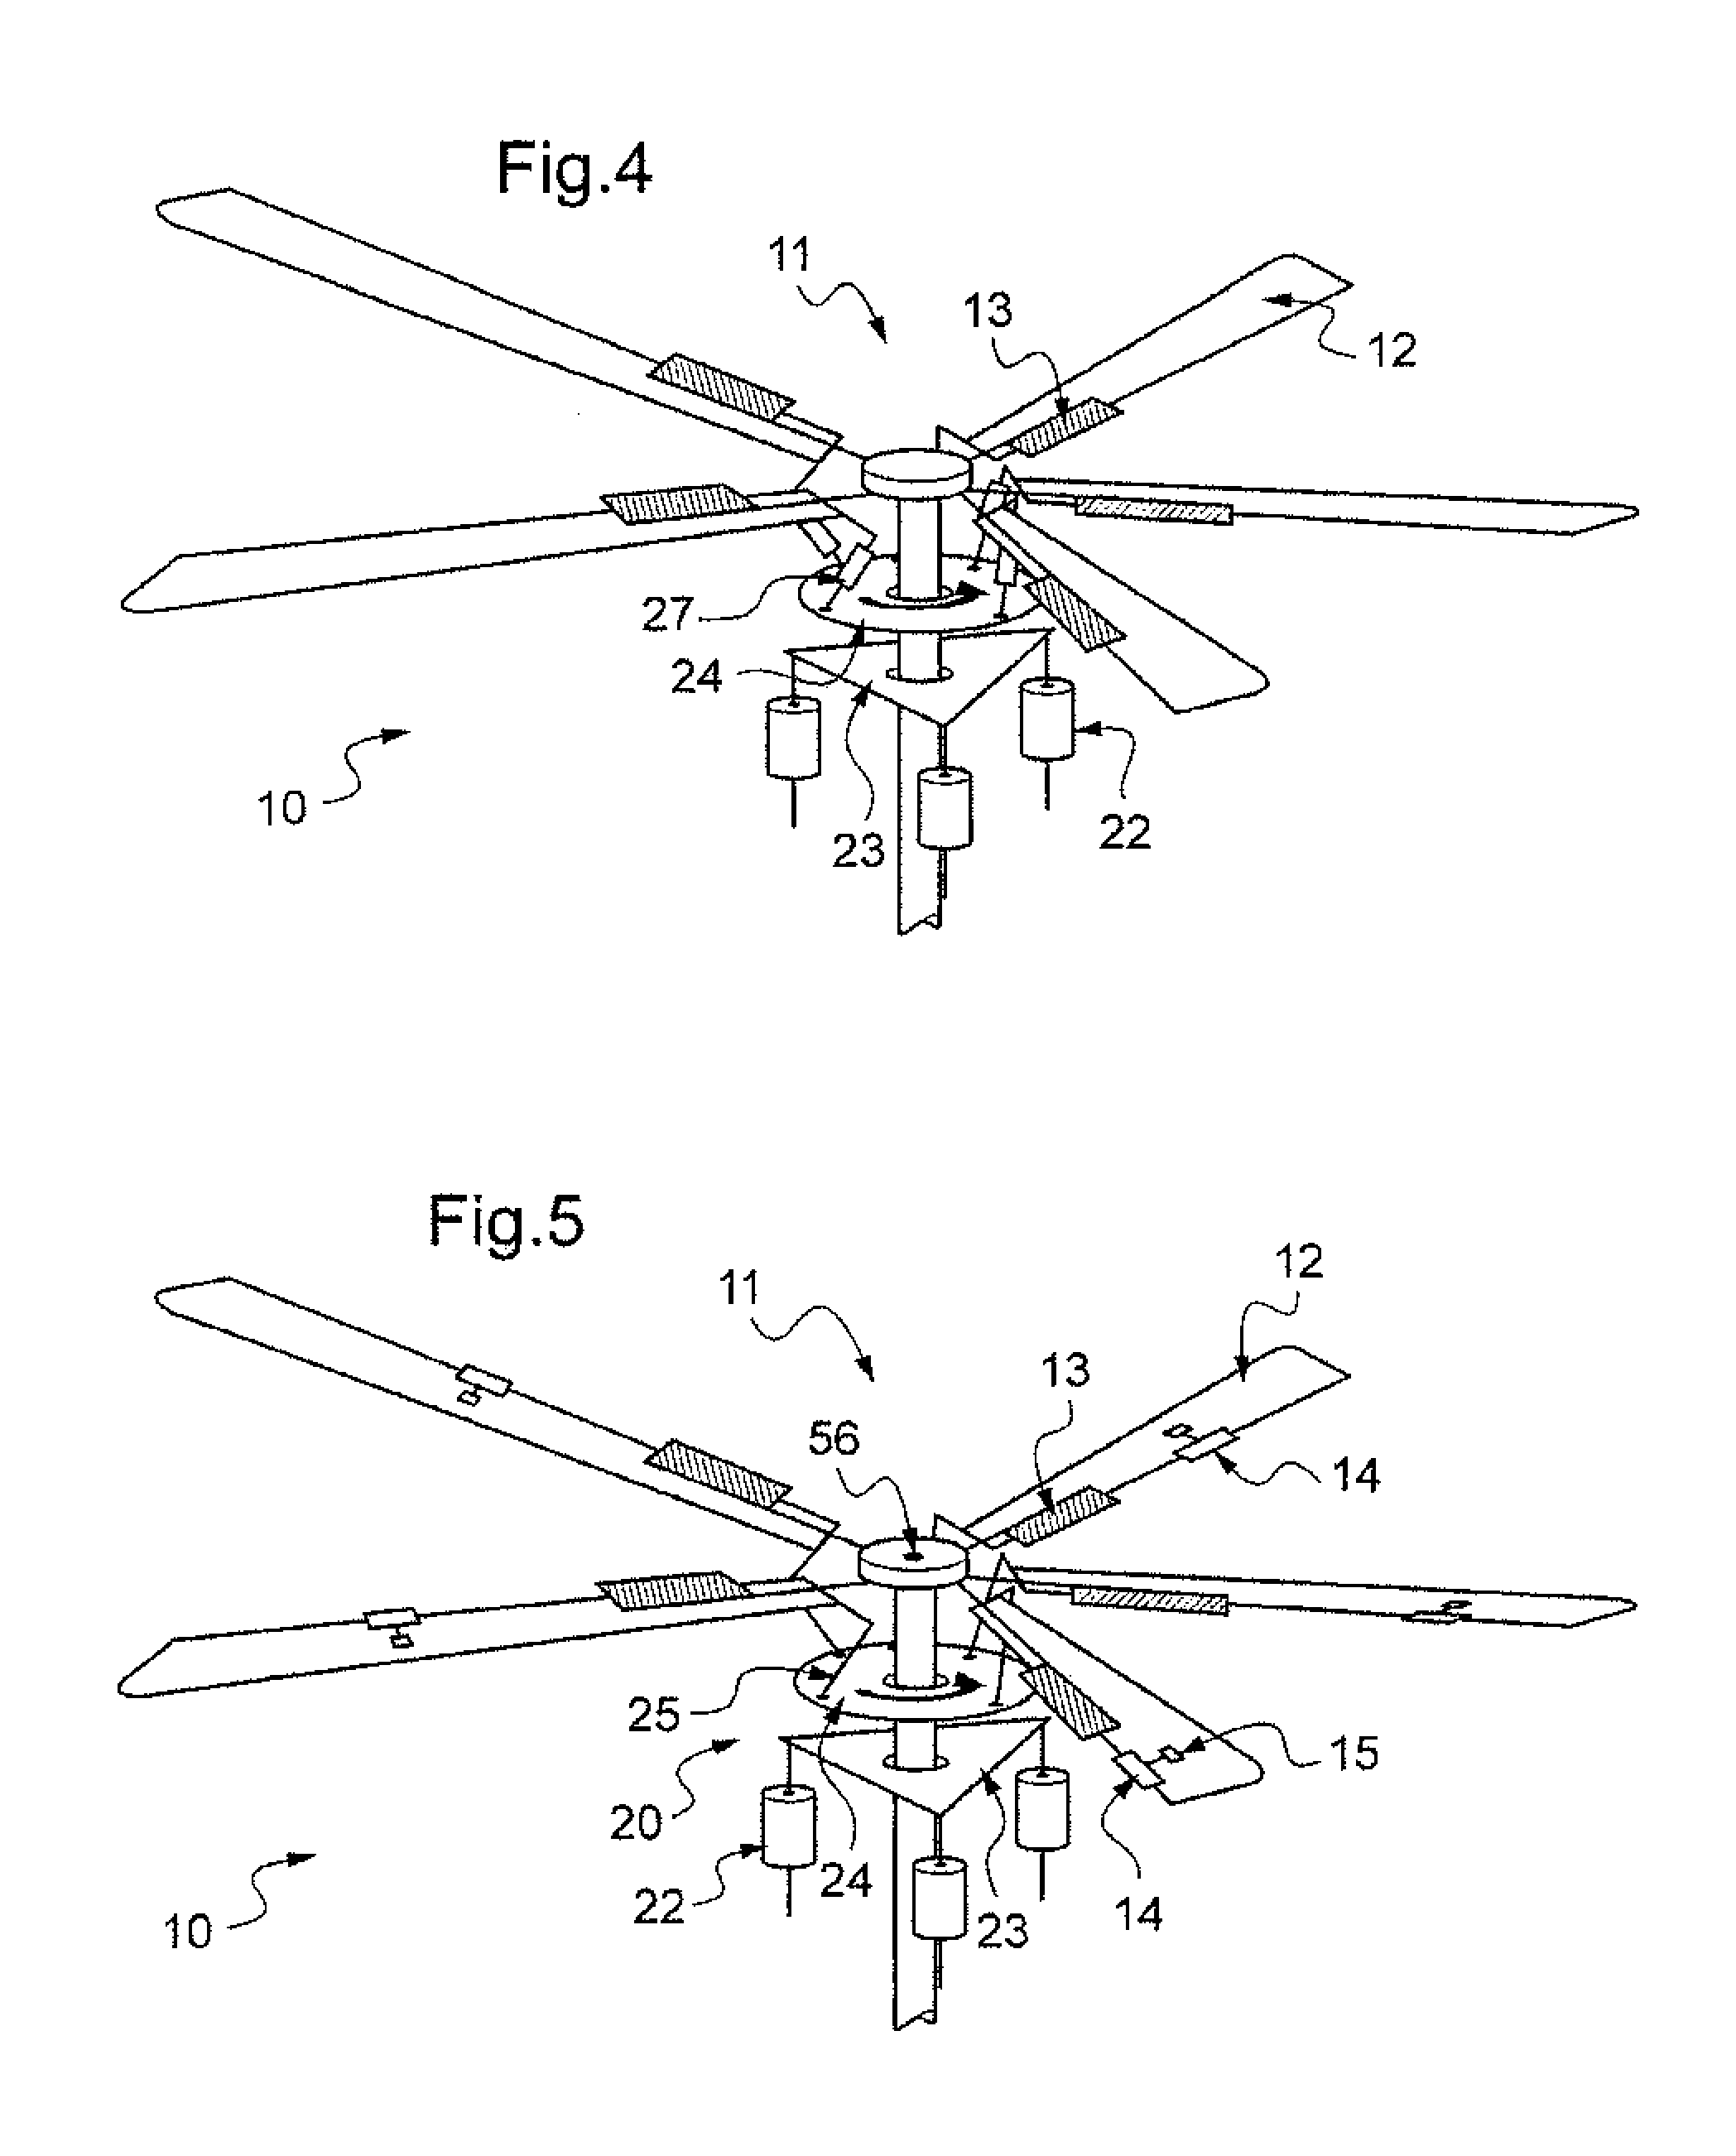 Device for varying blade pitch of a lift rotor